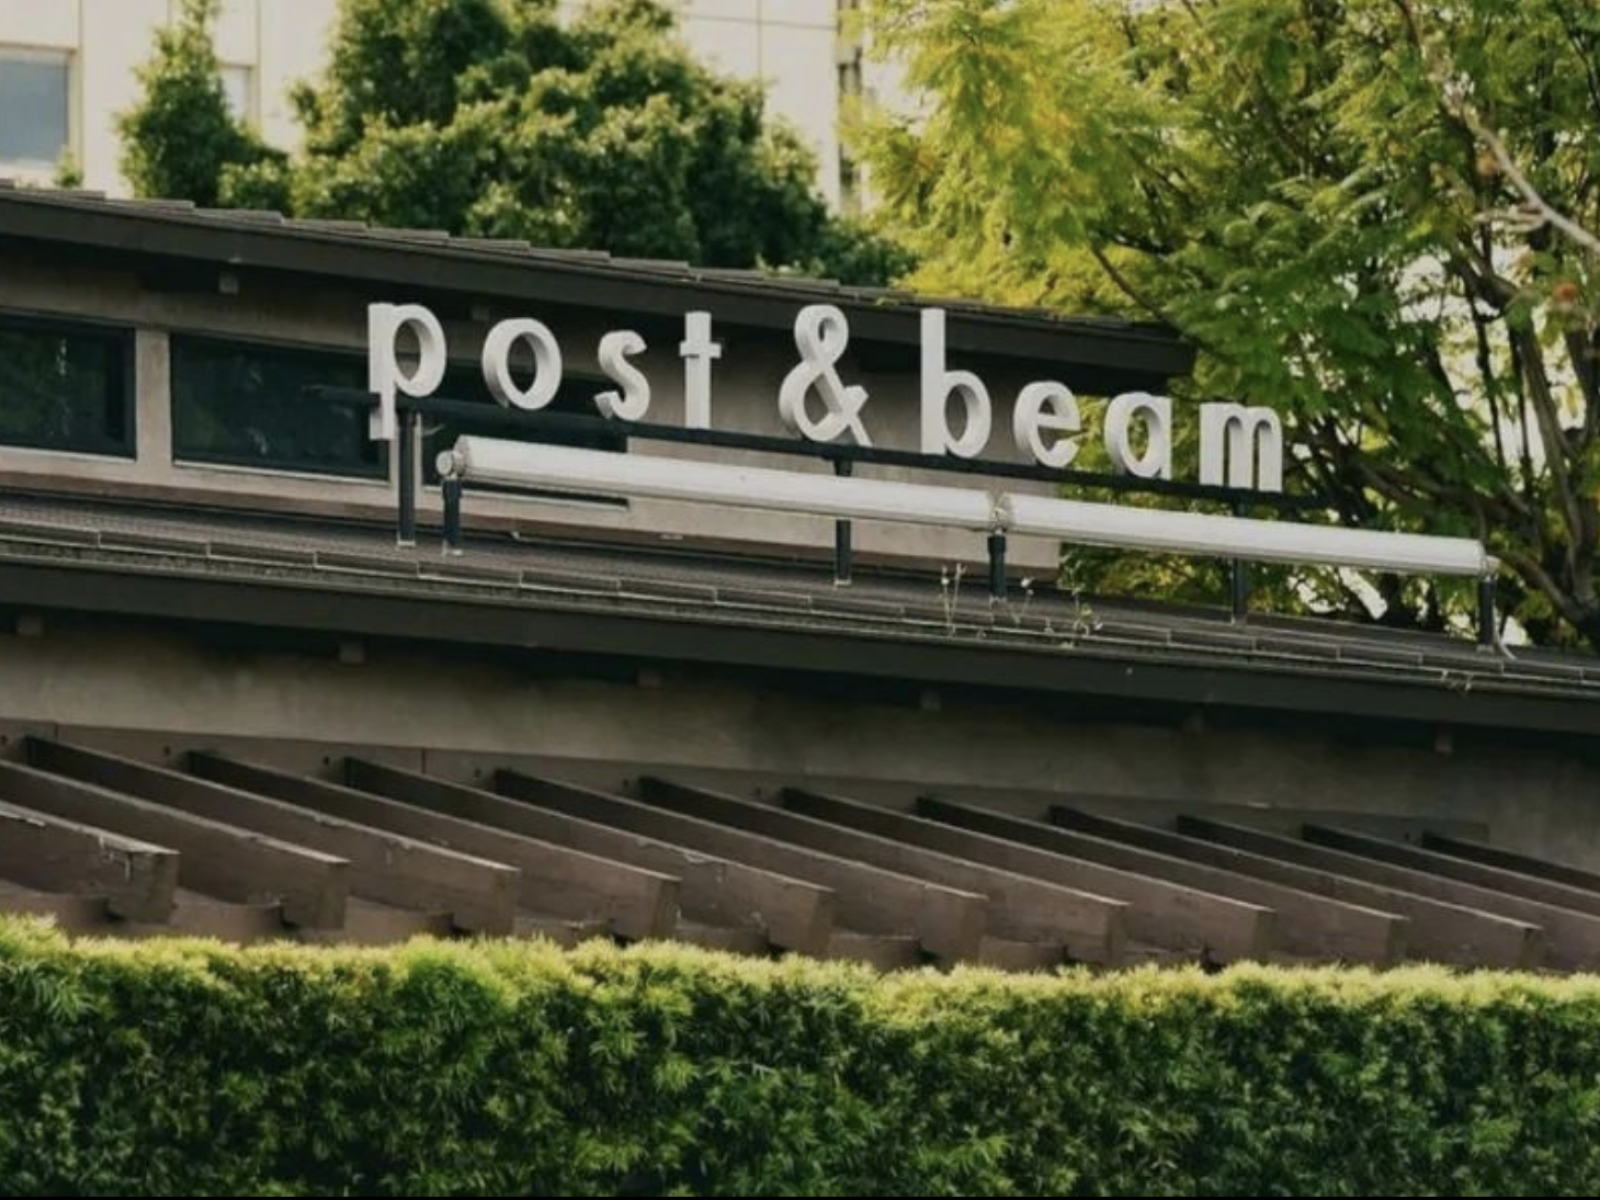 Main image for business titled Post & Beam